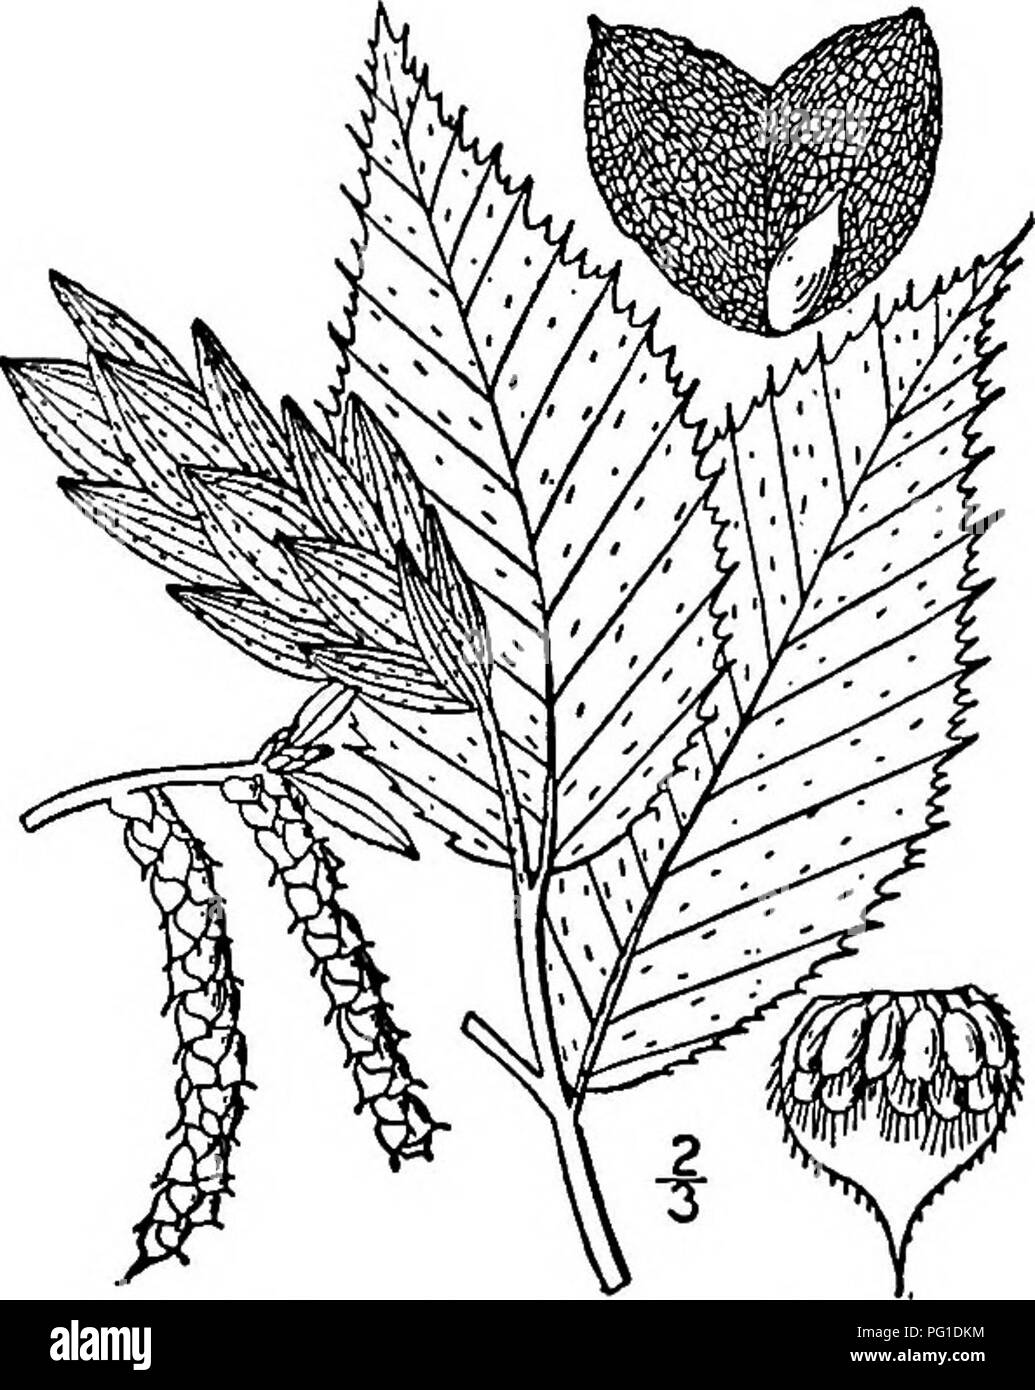 . North American trees : being descriptions and illustrations of the trees growing independently of cultivation in North America, north of Mexico and the West Indies . Trees. Iron wood 243 The leaves are alternate, ovate, obovate, or oblong-lanceolate, toothed, stalked and stipulate, the stipules falhng away soon after they unfold. The very small, imperfect staminate and pistillate flowers are borne in separate catkins on the same tree (monoecious), and open with or before the leaves. The staminate ones are in dense narrow drooping catkins, hke those of the Hornbeams, consisting only of severa Stock Photo